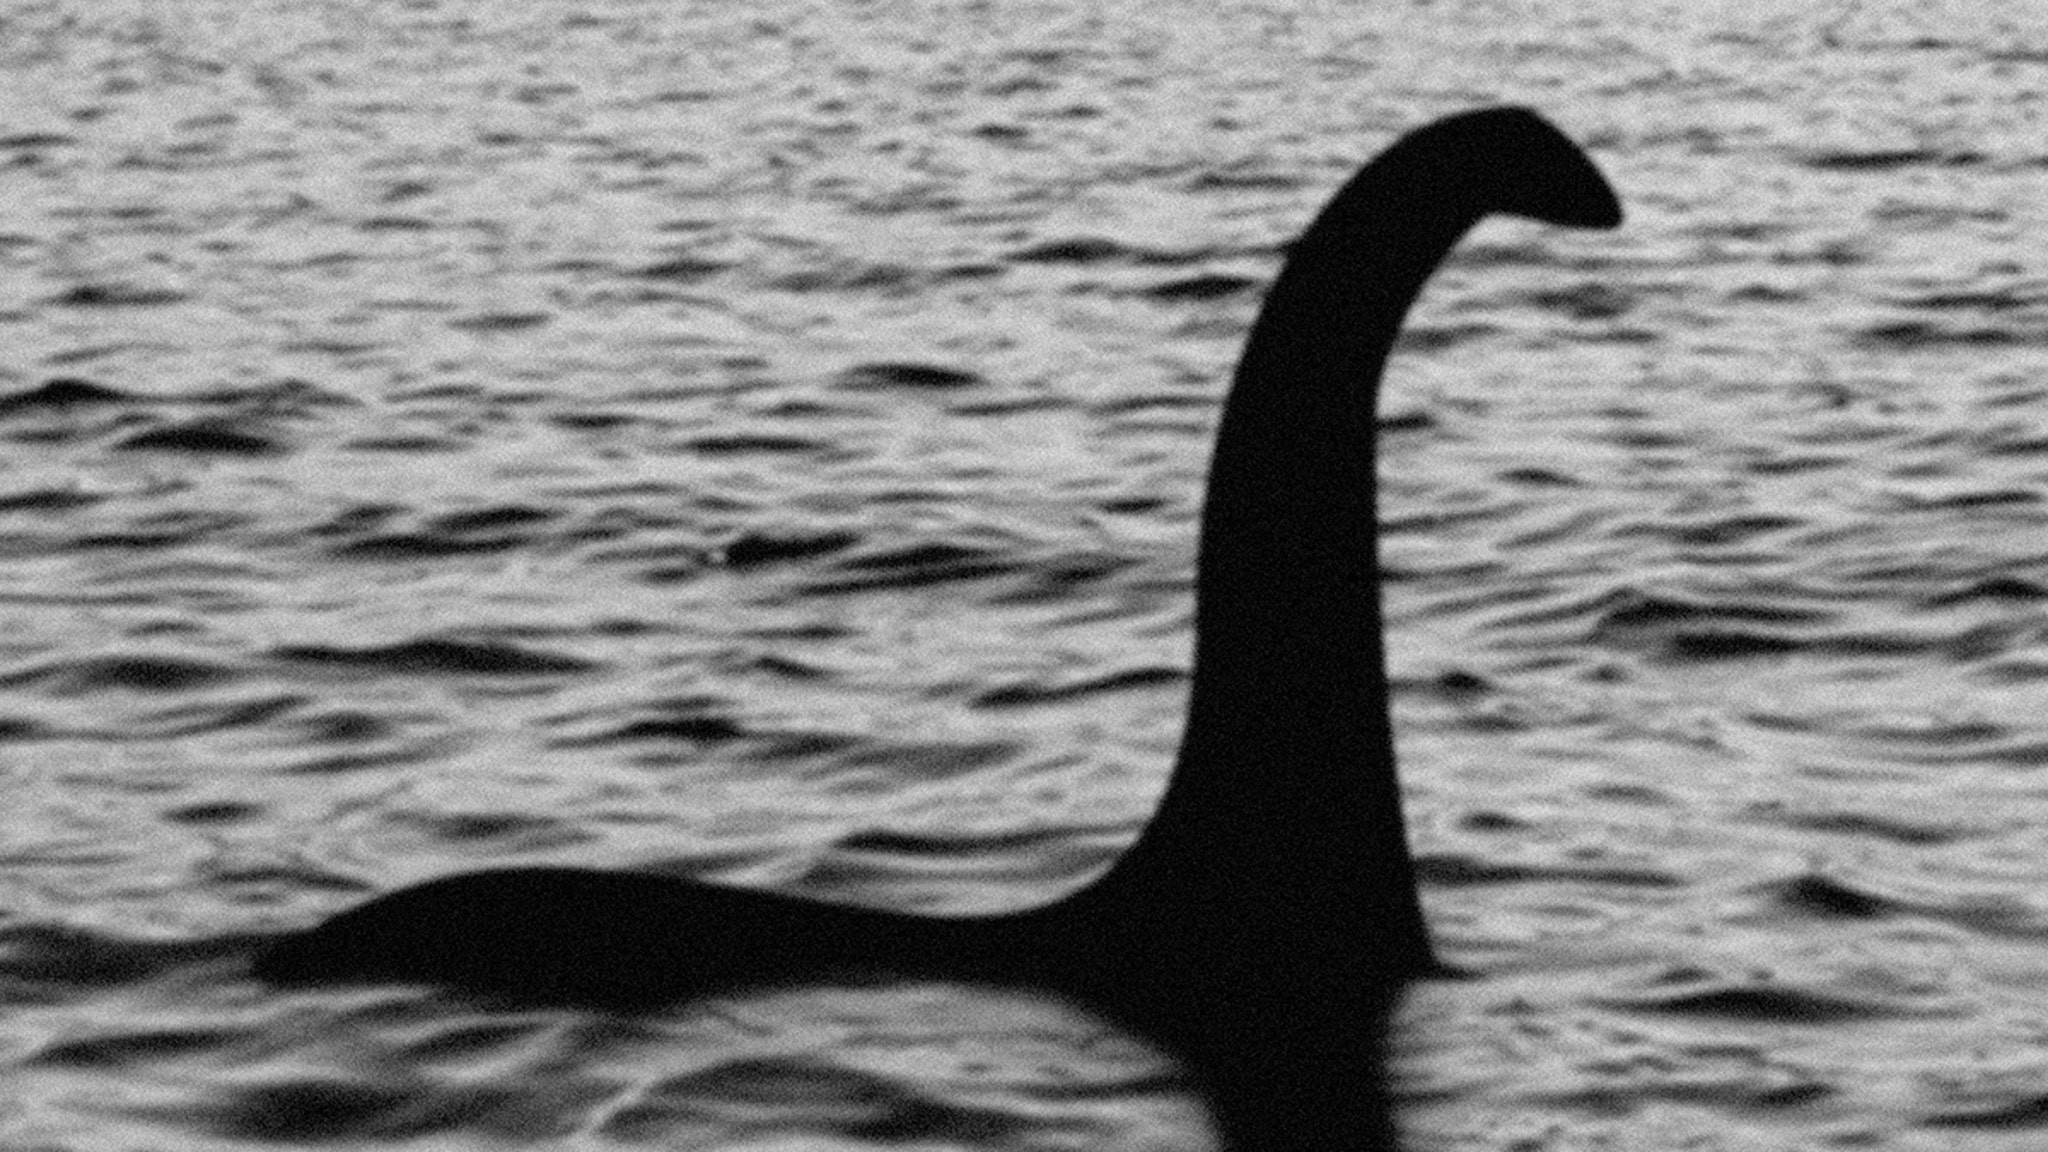 Loch Ness Monster Allegedly Captured on Drone Video By Outdoorsman